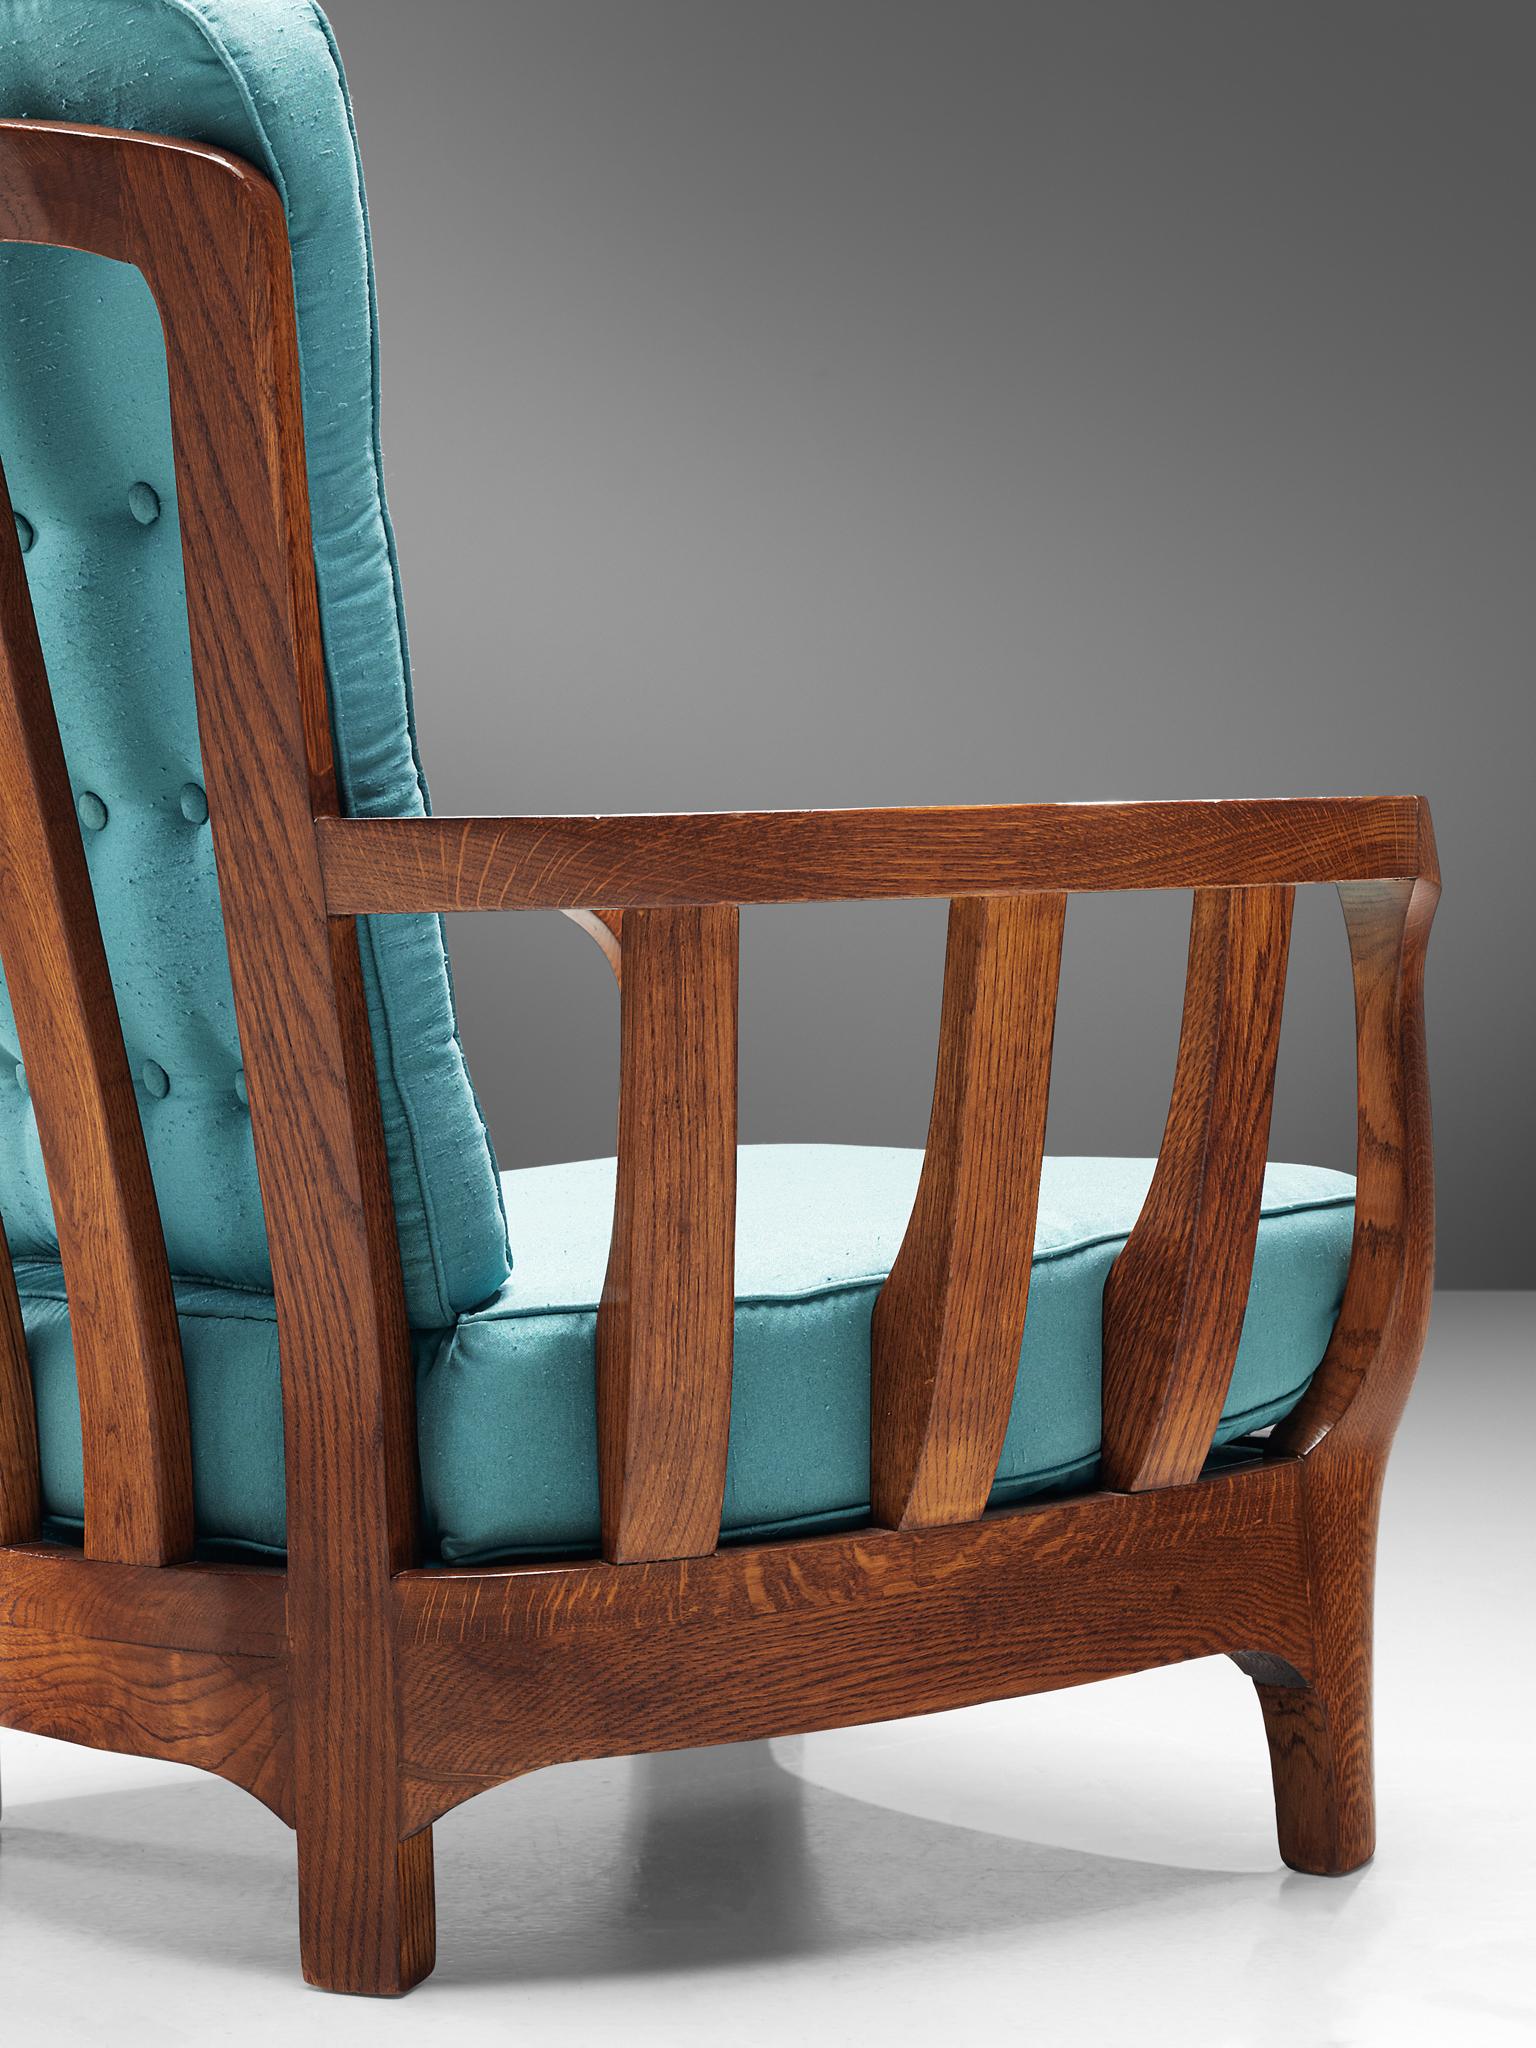 Lounge chair, oak and fabric, Italy, 1960s.

This sculptural Italian armchair is very well executed and made out of solid, carved oak. The robust chair feature wonderfully curved armrests with slats. The high back features an interesting open